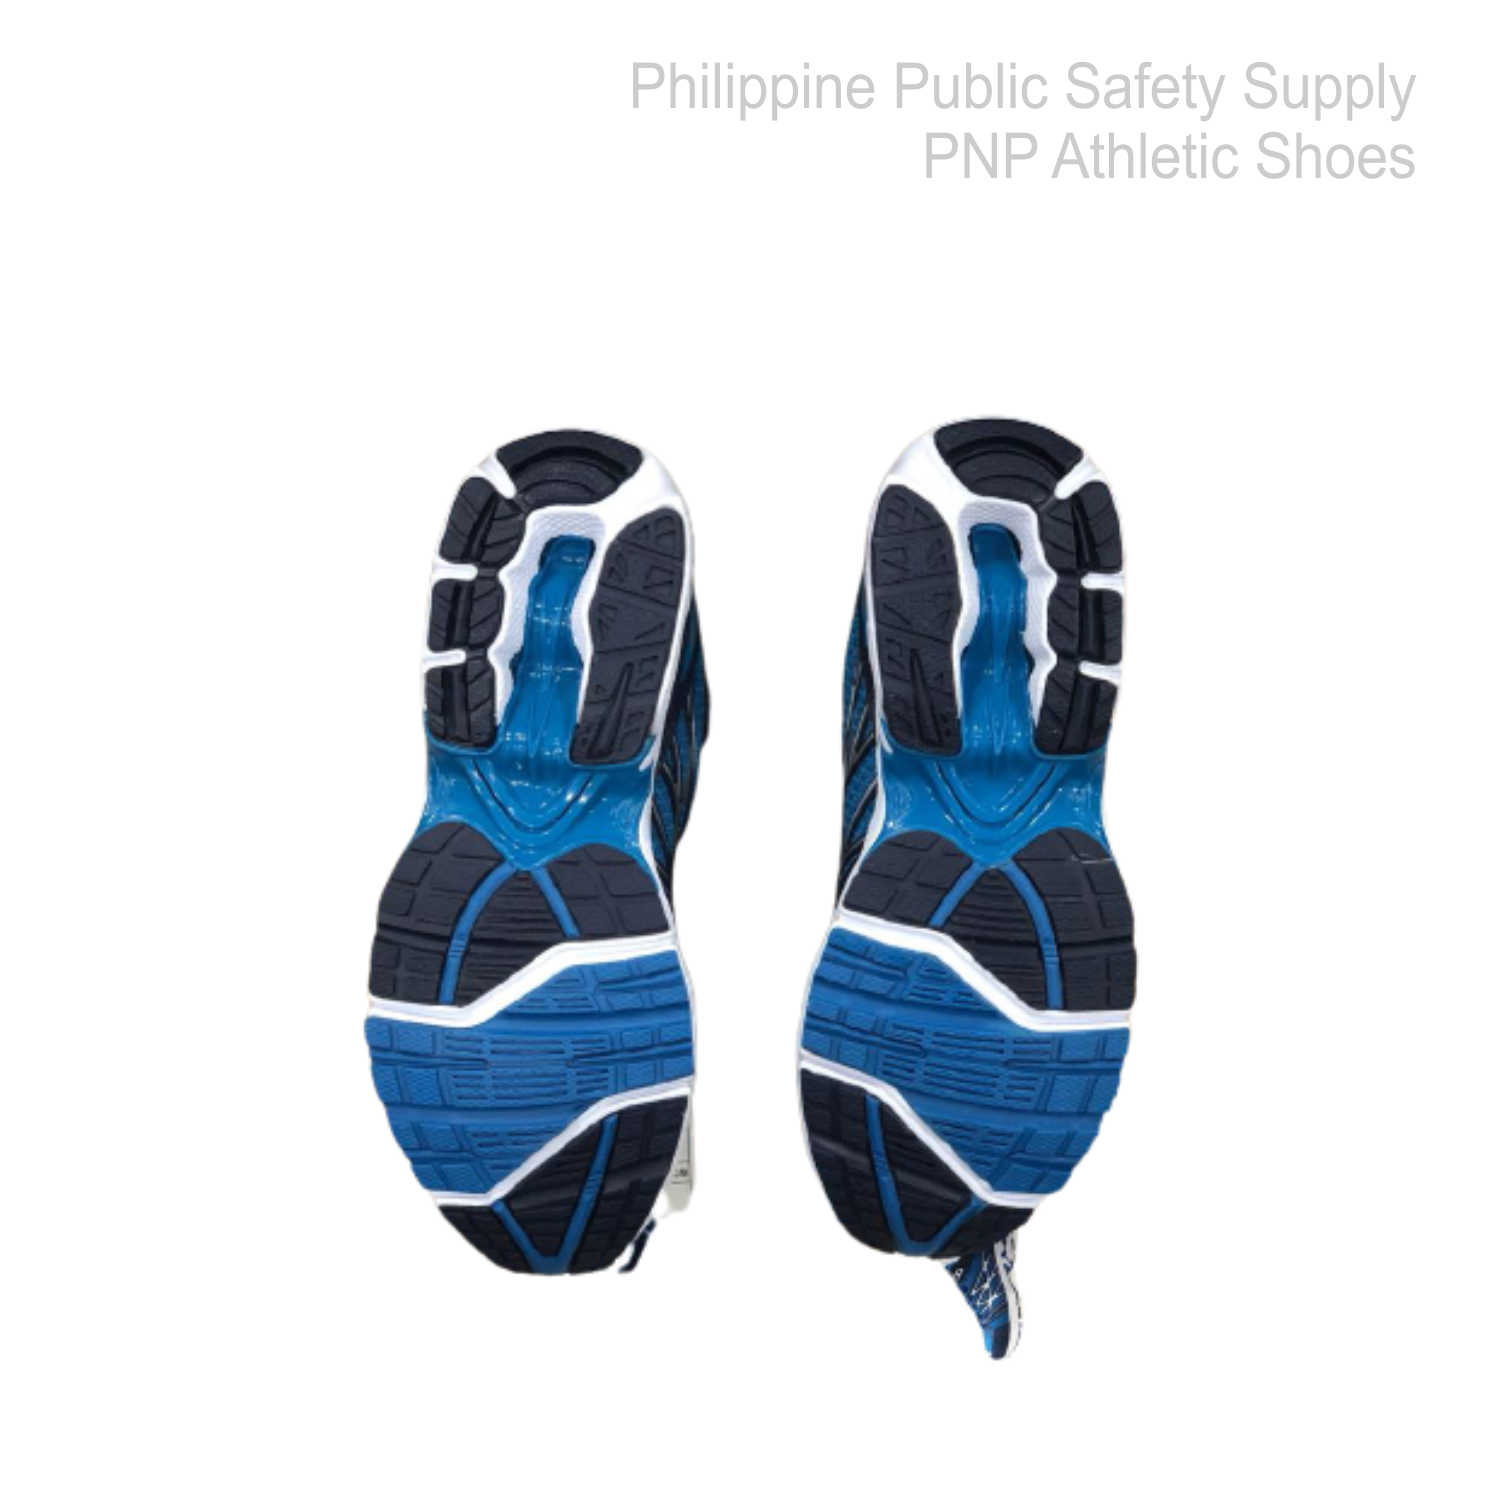 Philippine National Police (PNP) Athletic Shoes - PNP